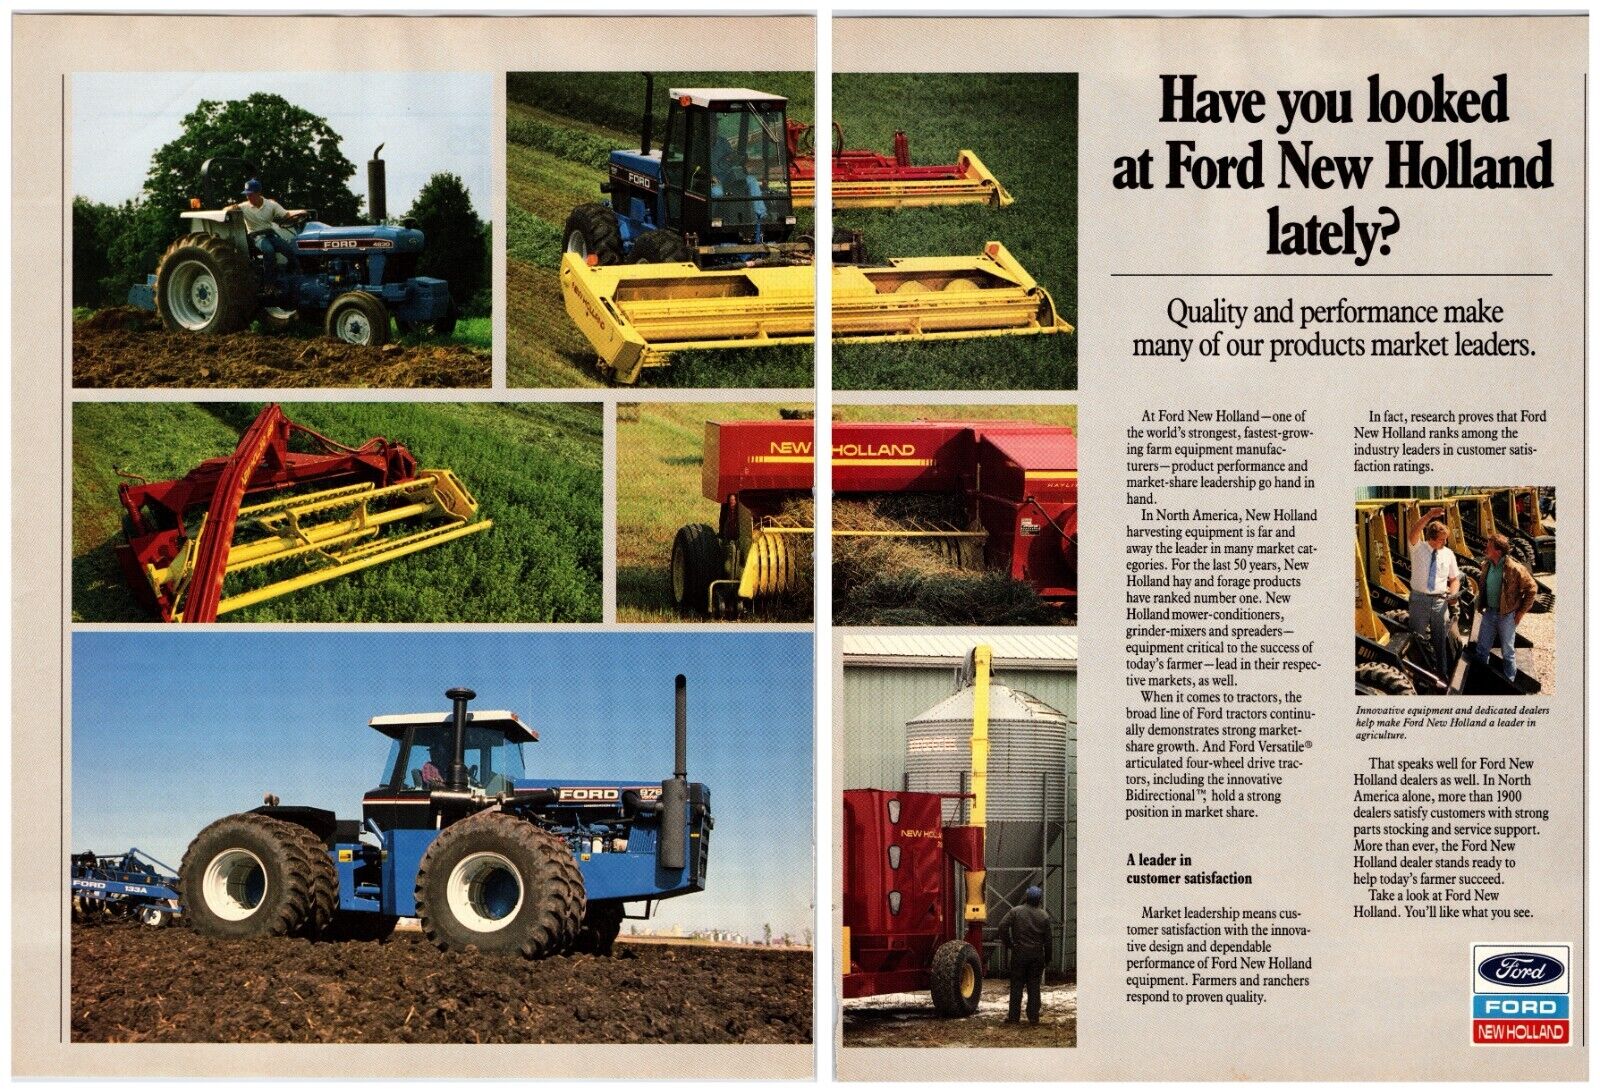 1990 Ford New Holland Equipment -  2 Page Print Advertisement (11in x 16in)